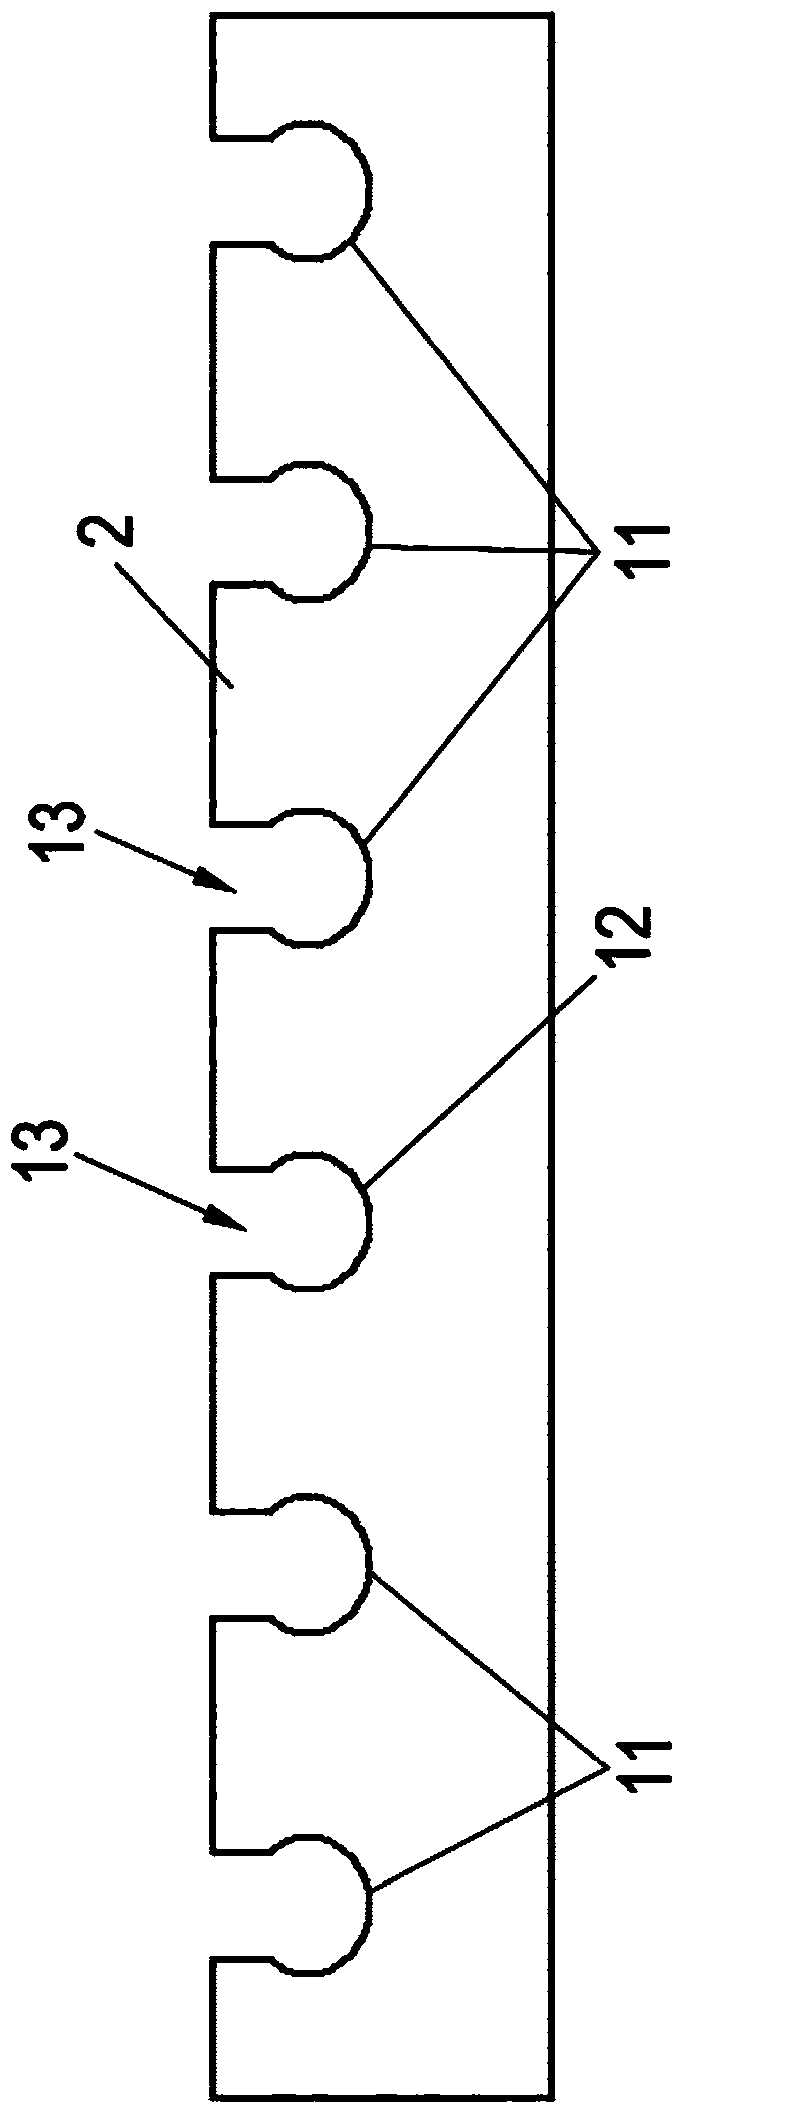 Pull-out guide device for furniture parts that are movable relative to one another comprising a roller bearing device